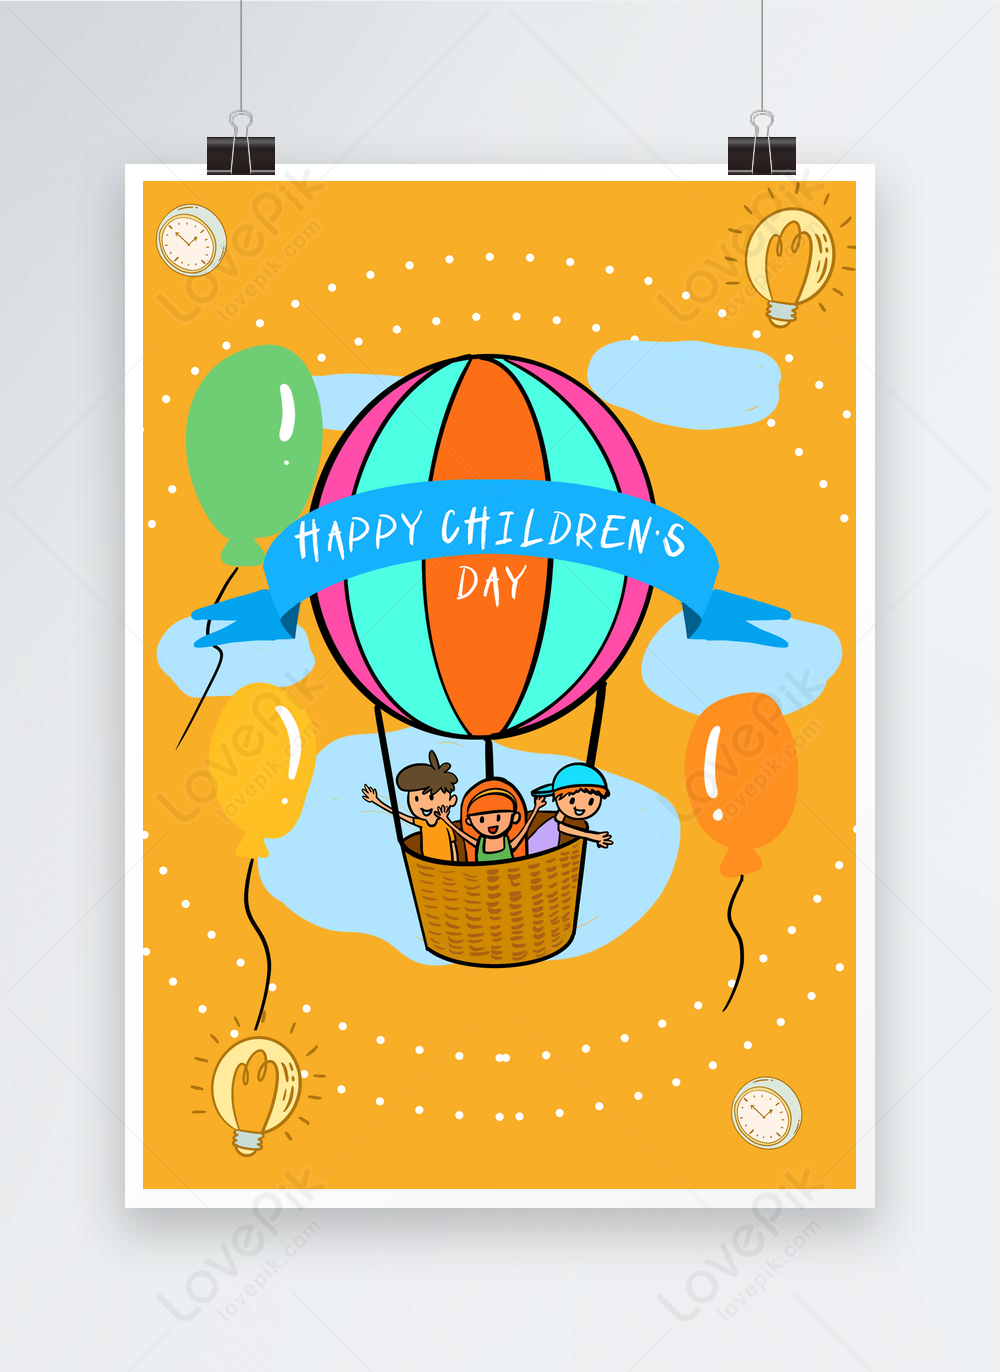 yellow-childrens-day-card-template-image-picture-free-download